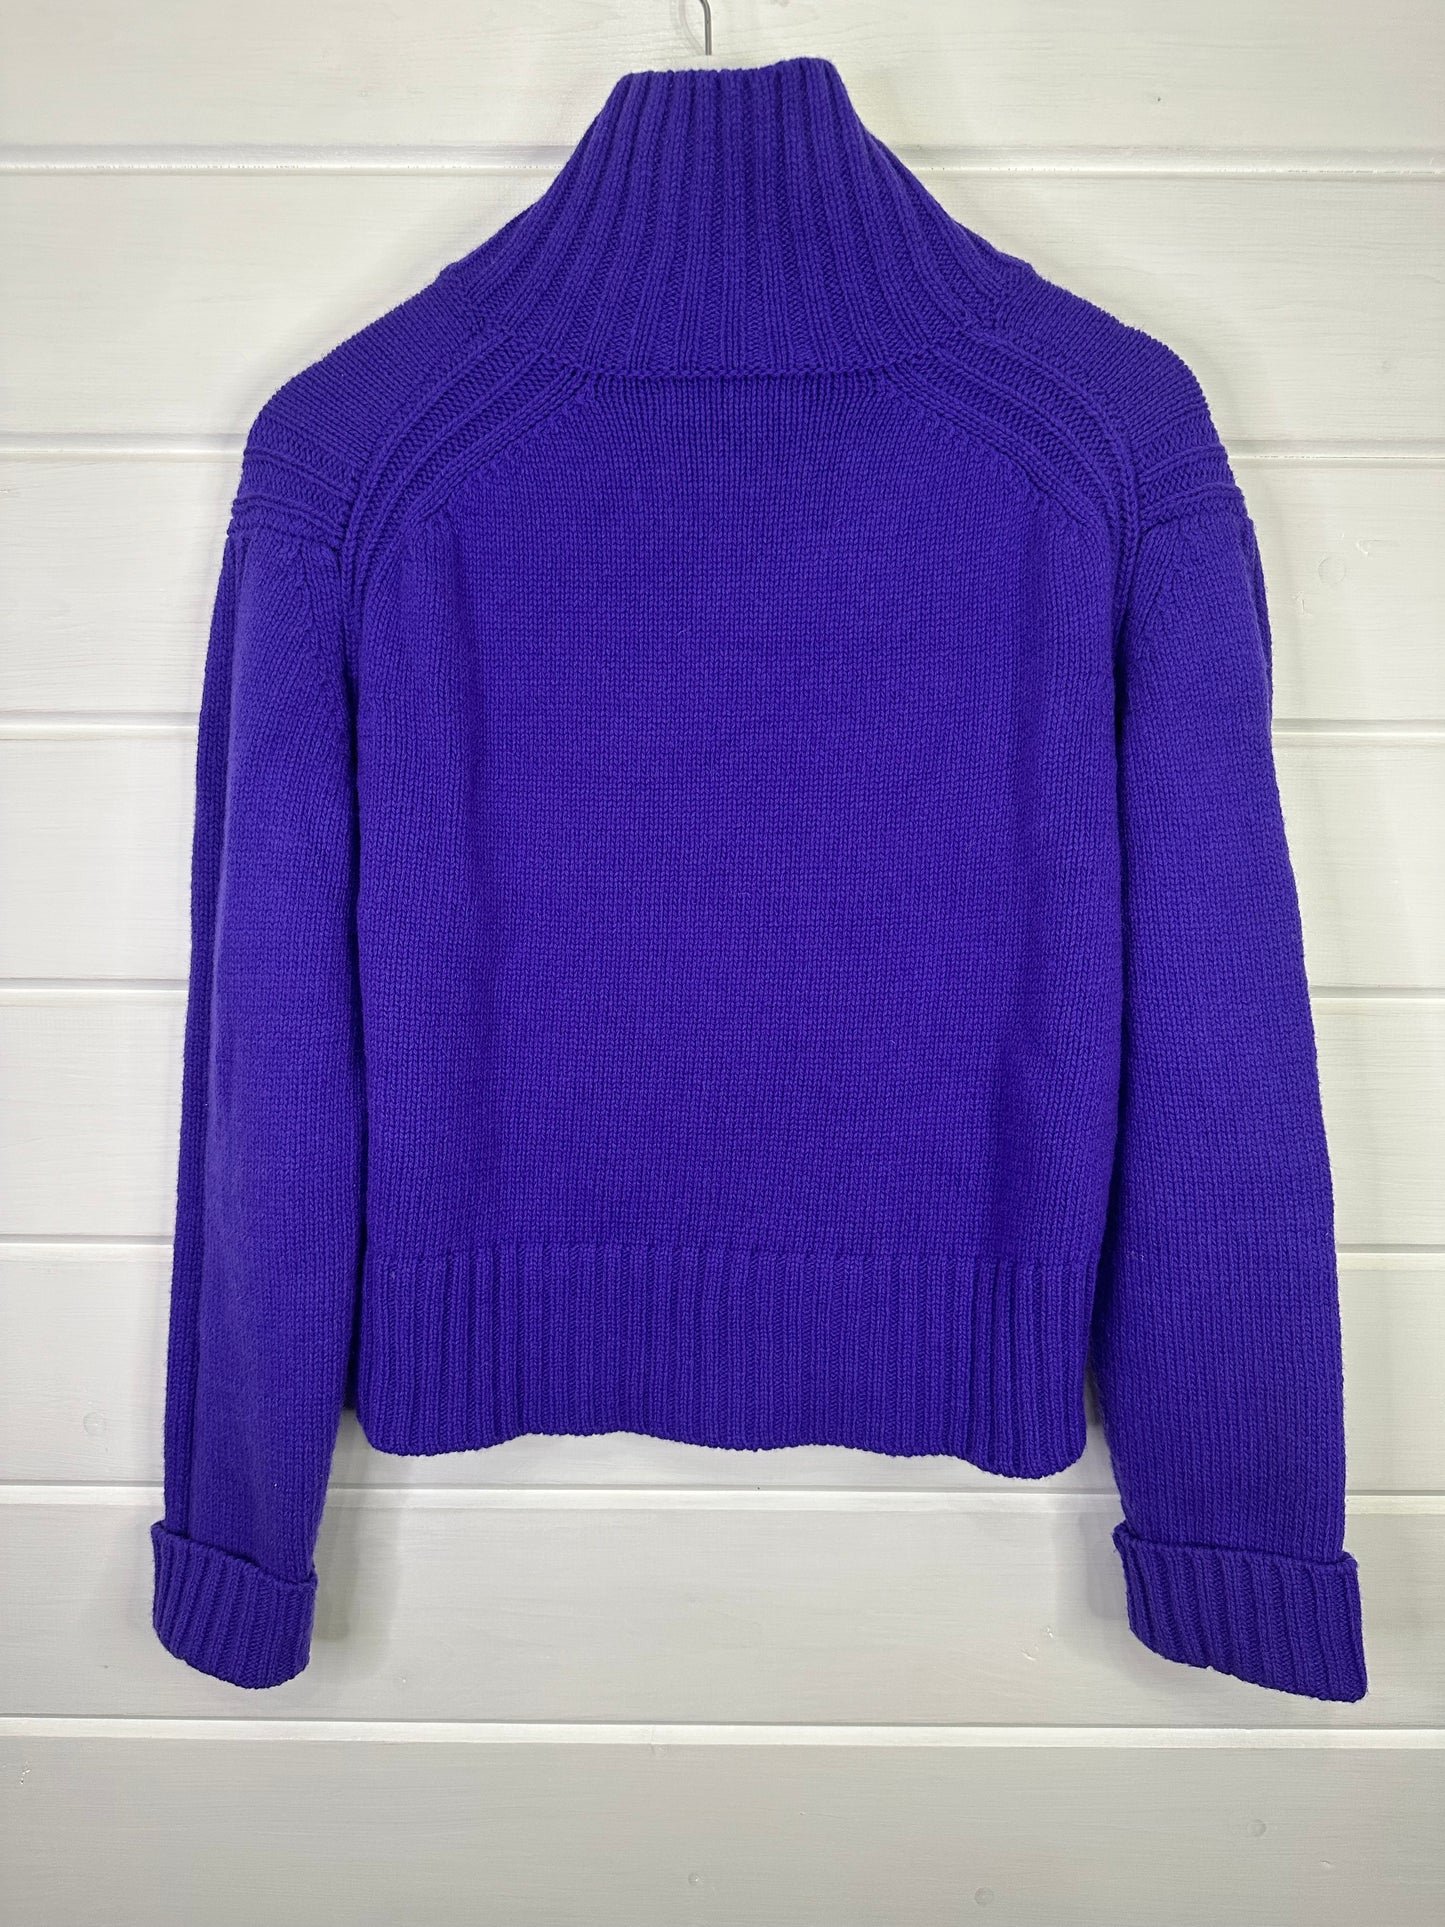 & Daughter Jumper - Size Small